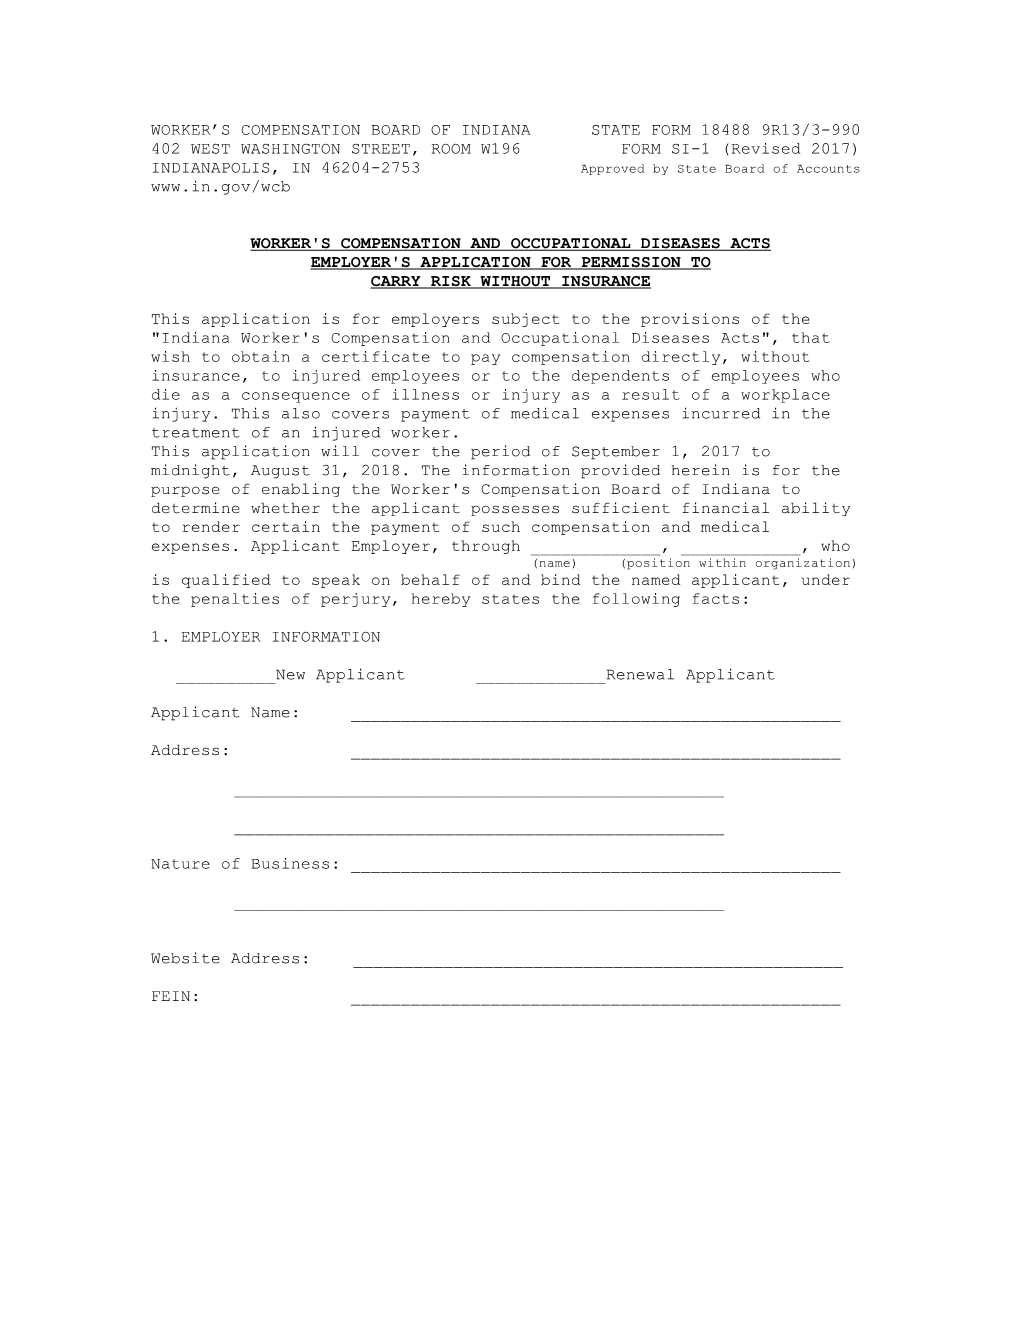 Workers Compensation Board of Indiana State Form 18488 9R13/3-990